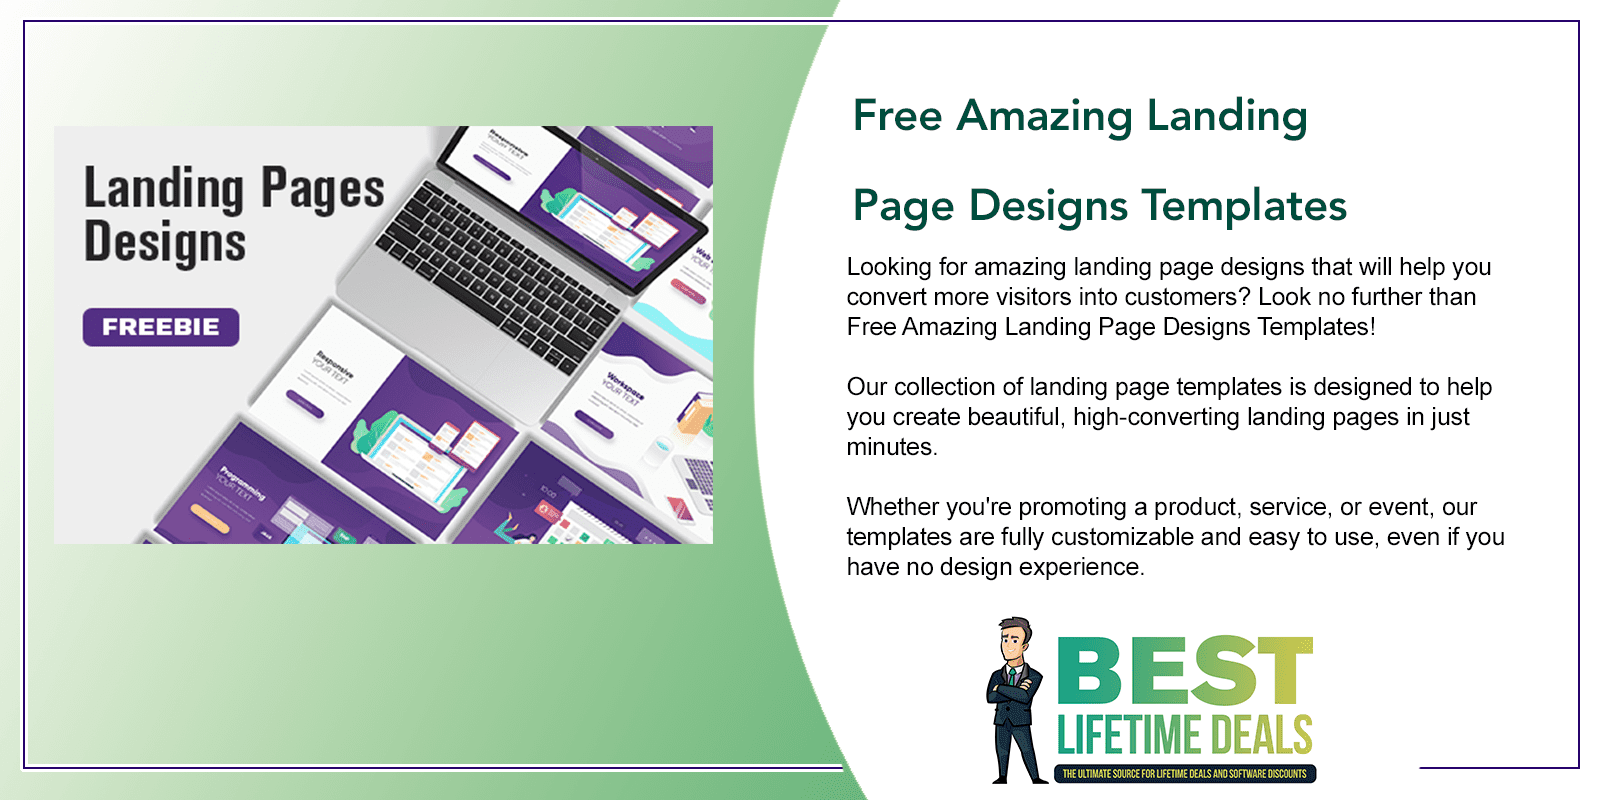 Free Amazing Landing Page Designs Templates Featured Image